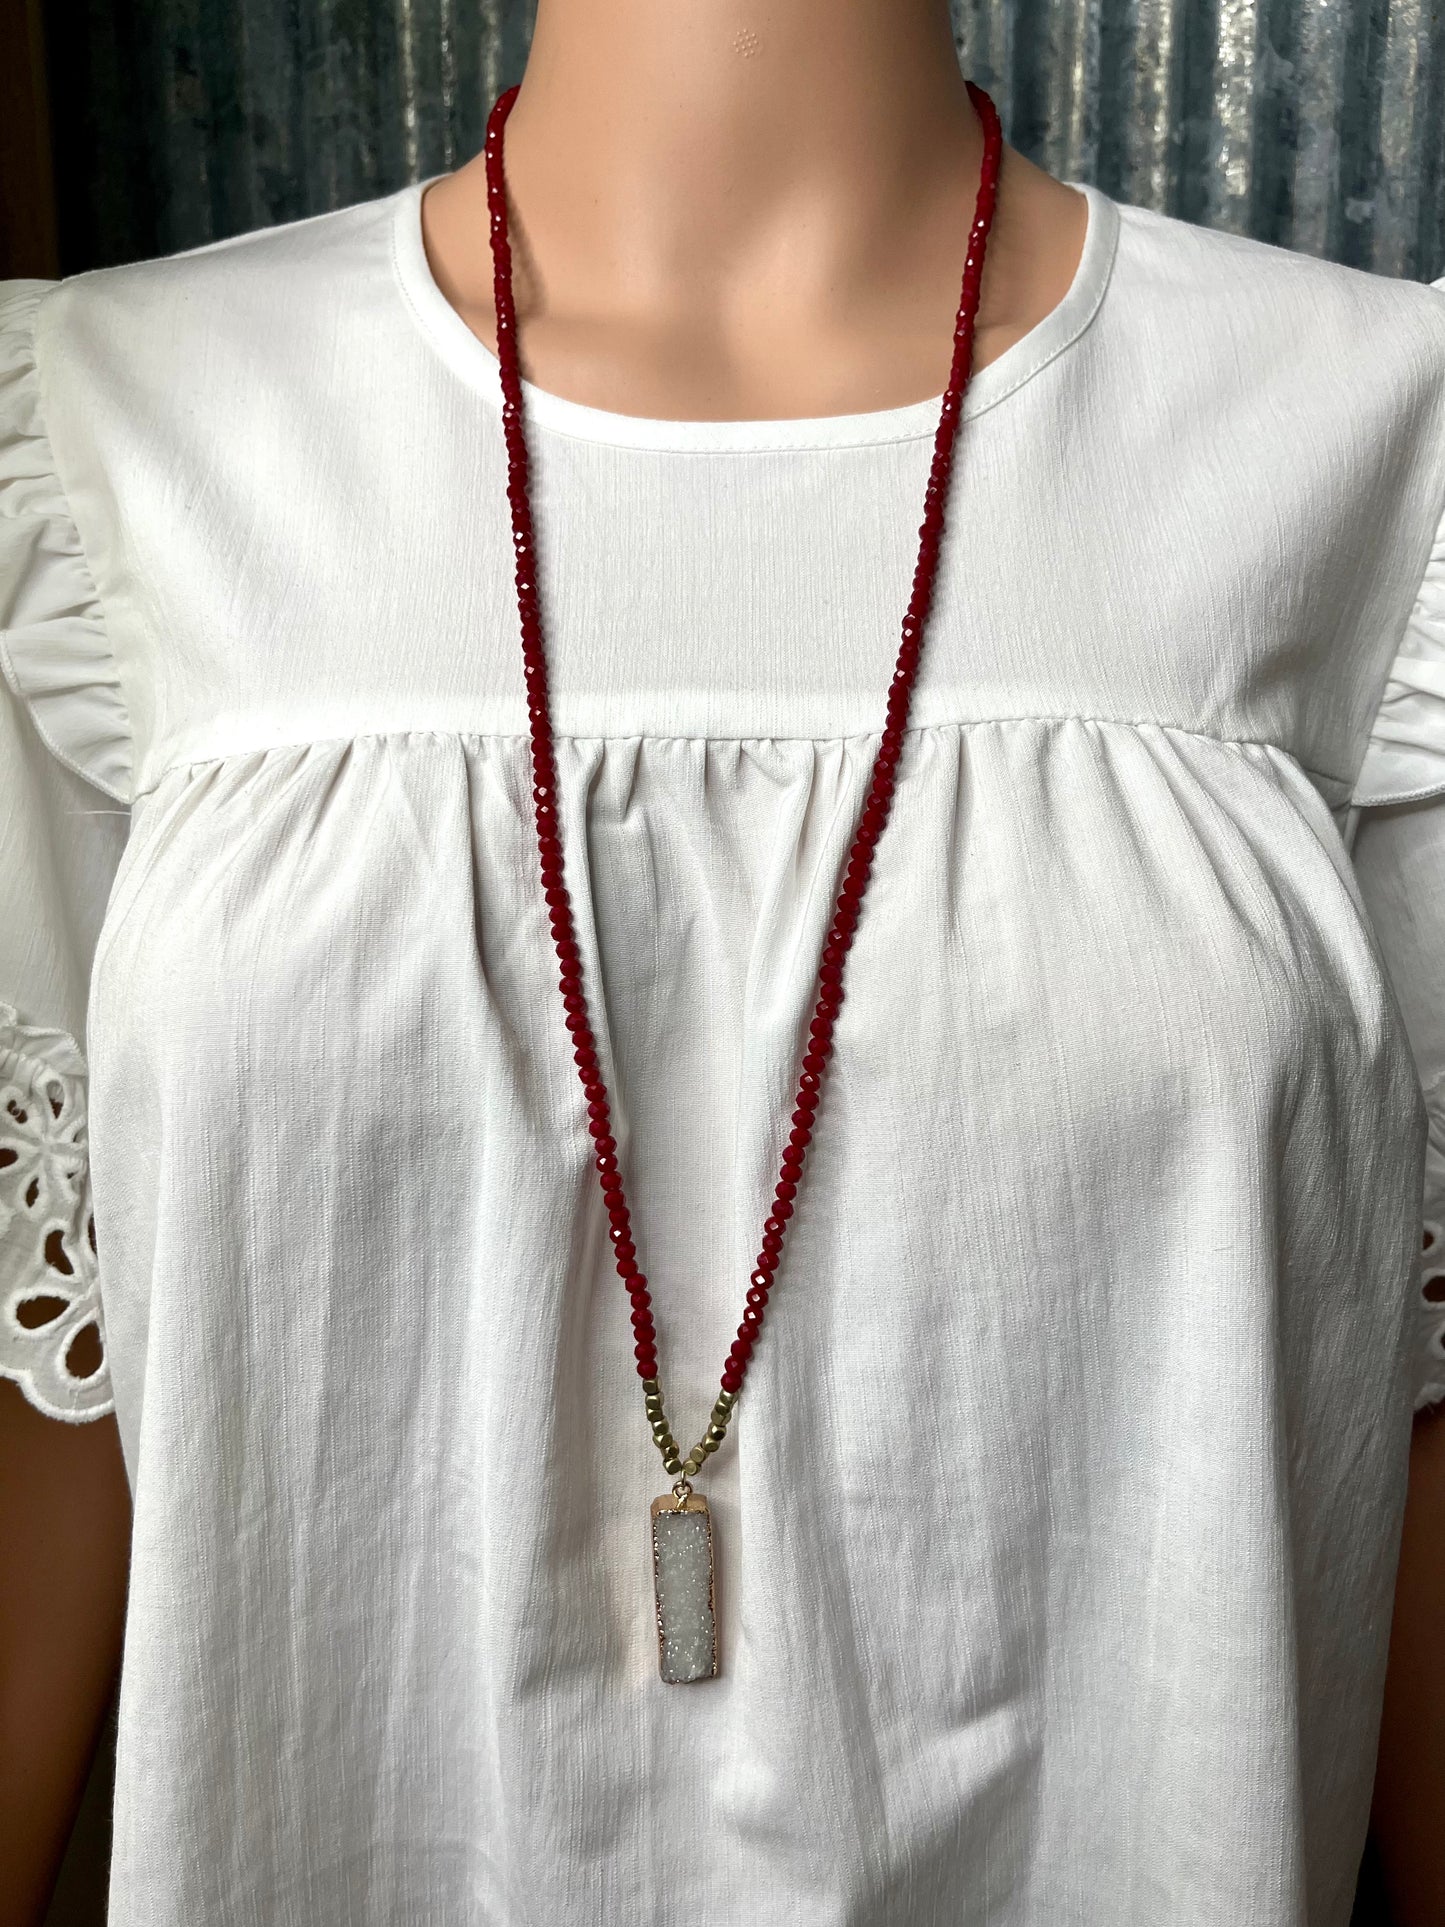 Dark Red Beaded Necklace with Stone Pendant